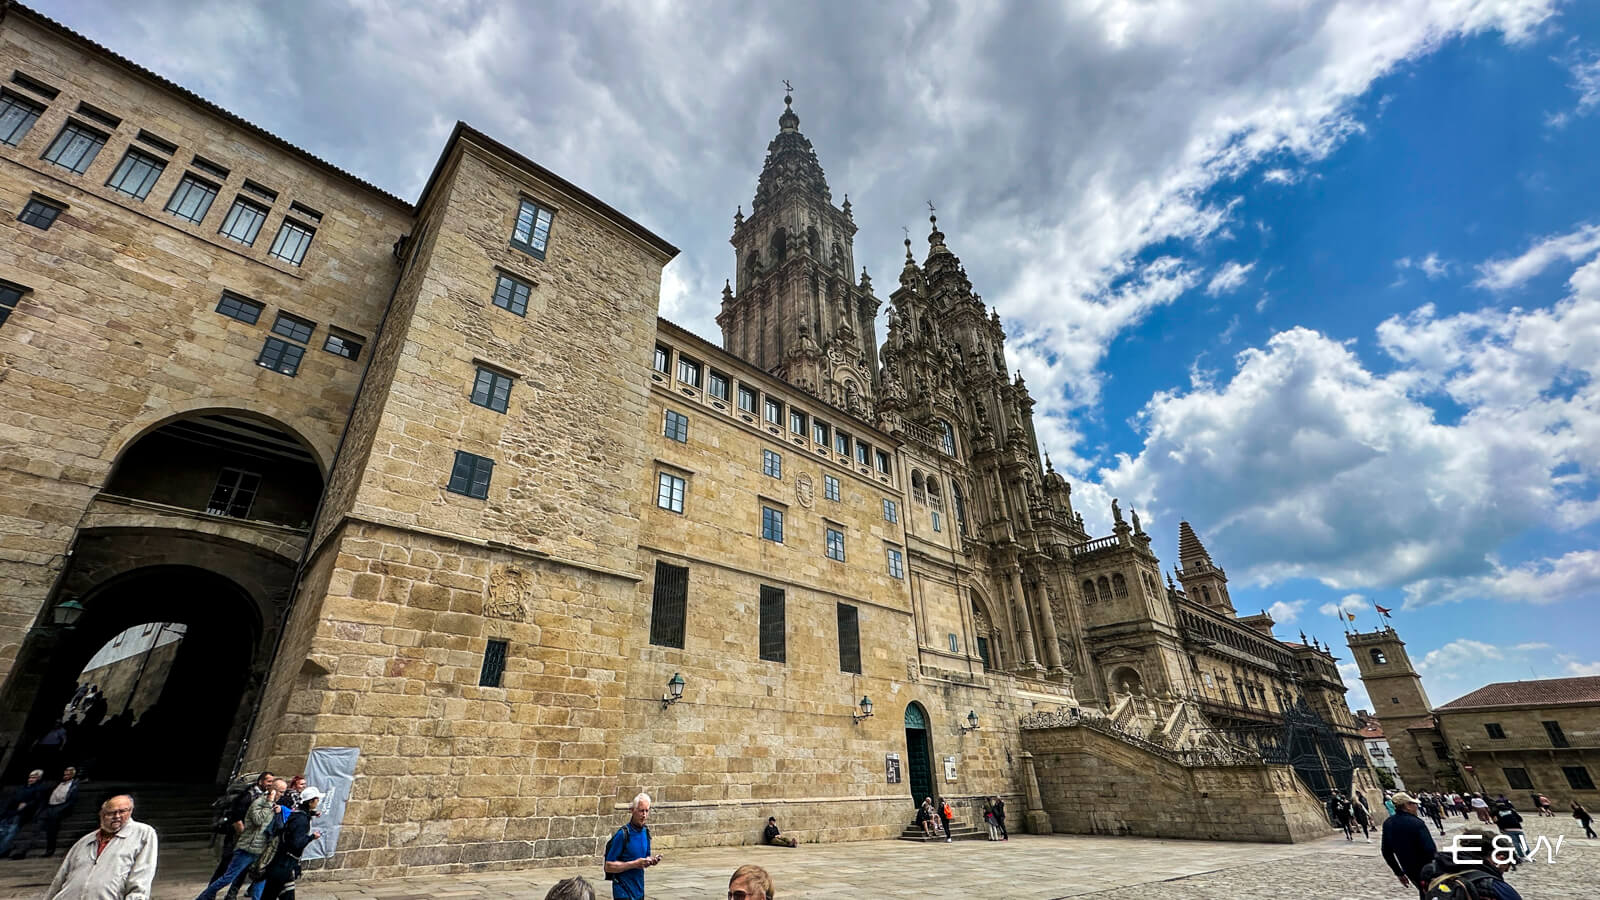 What to do in Galicia? Our top plans - Visit cities brimming with history